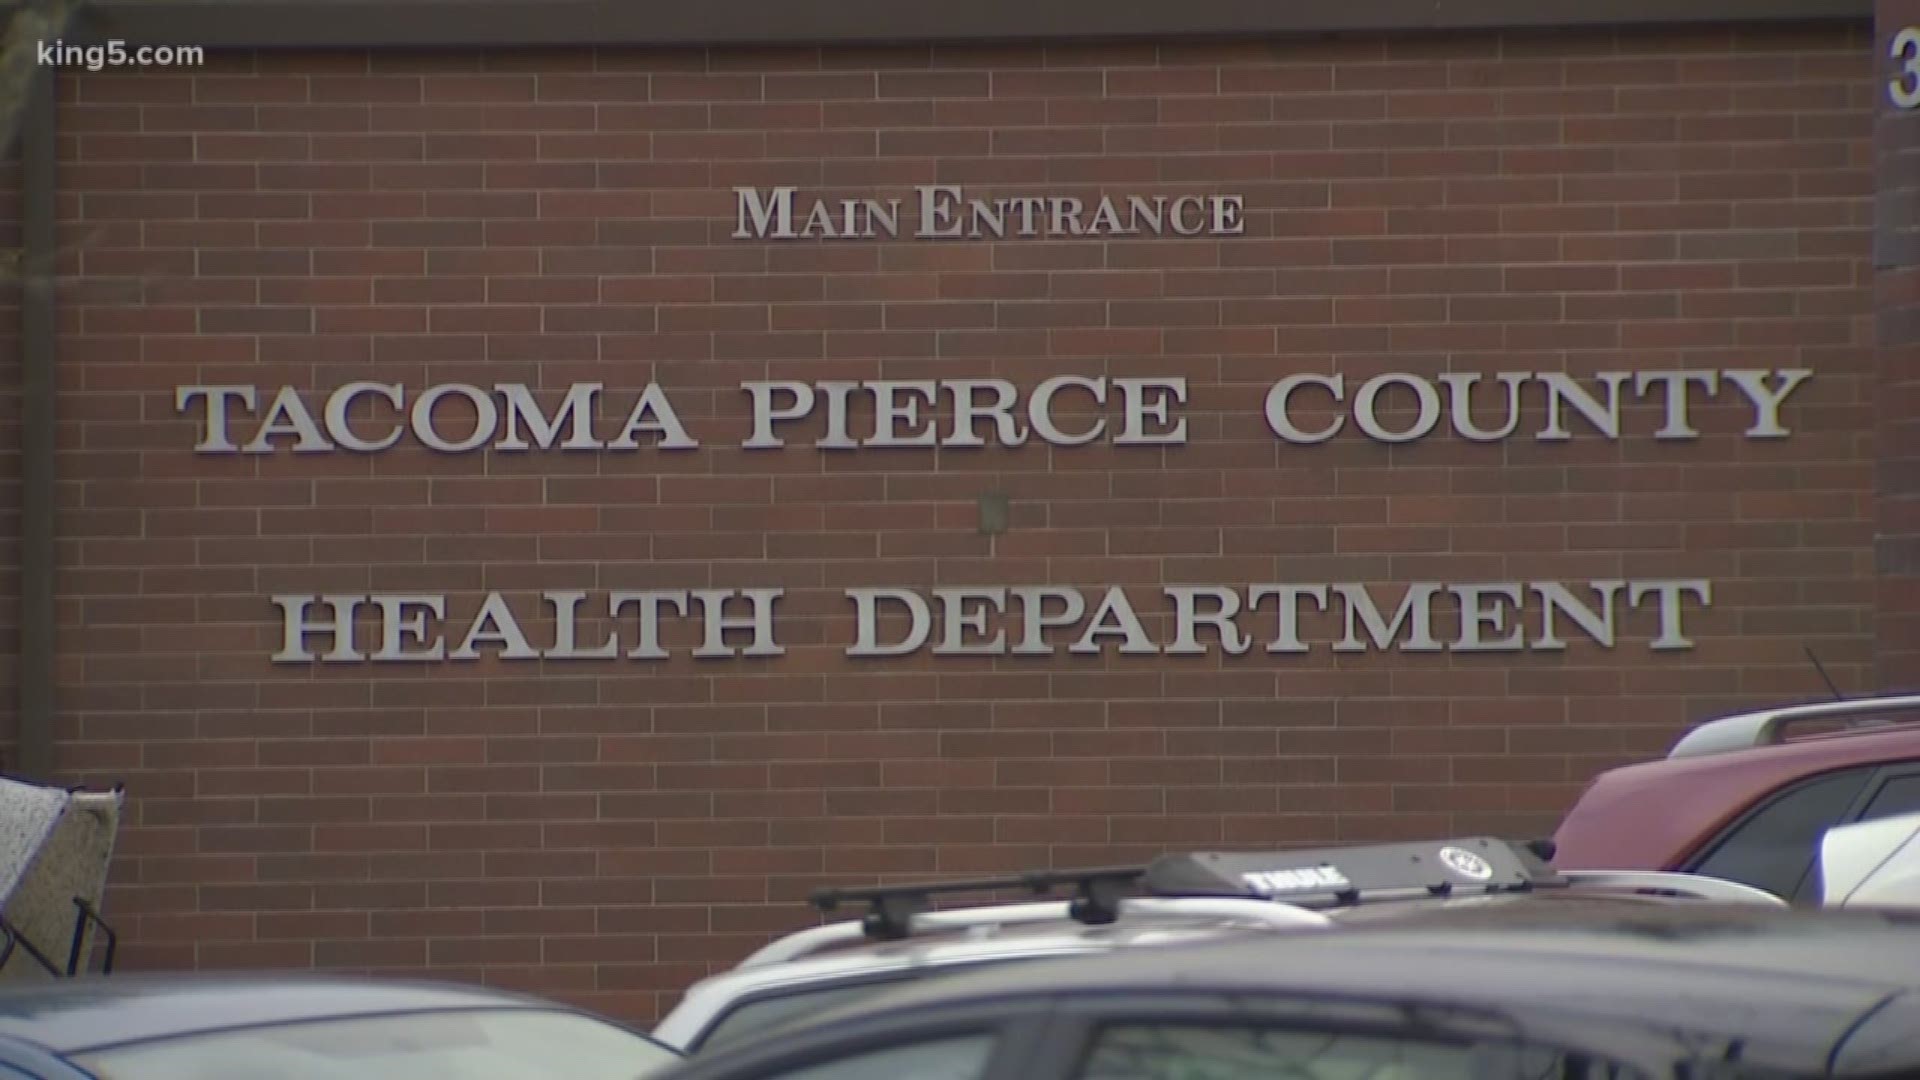 The Tacoma Pierce County Health Department is looking into two separate cases of suspected norovirus outbreaks.